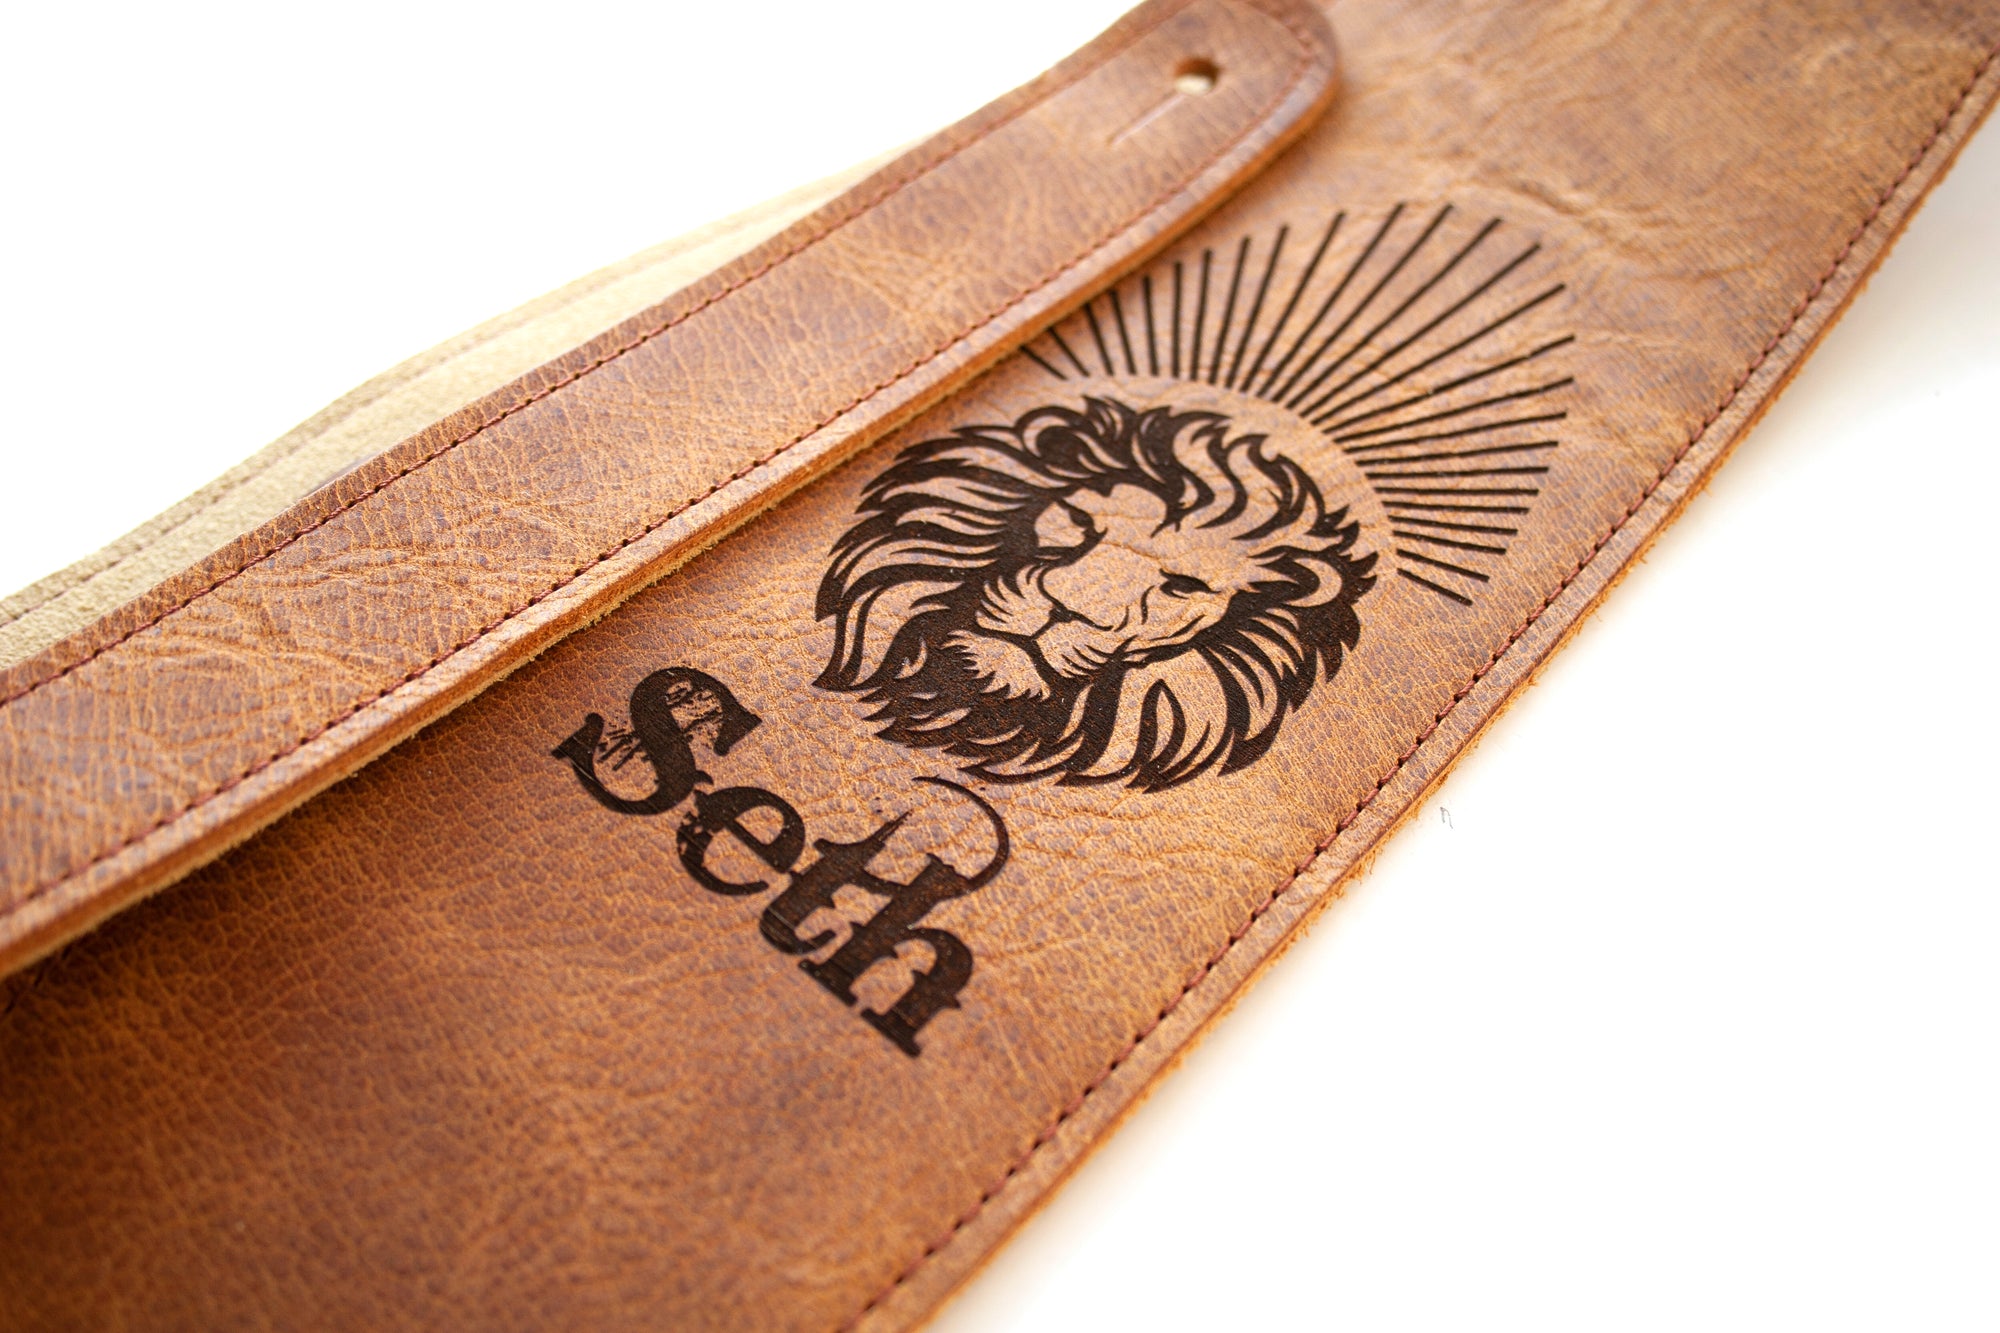 Leather guitar strap with a lion laser engraved. 